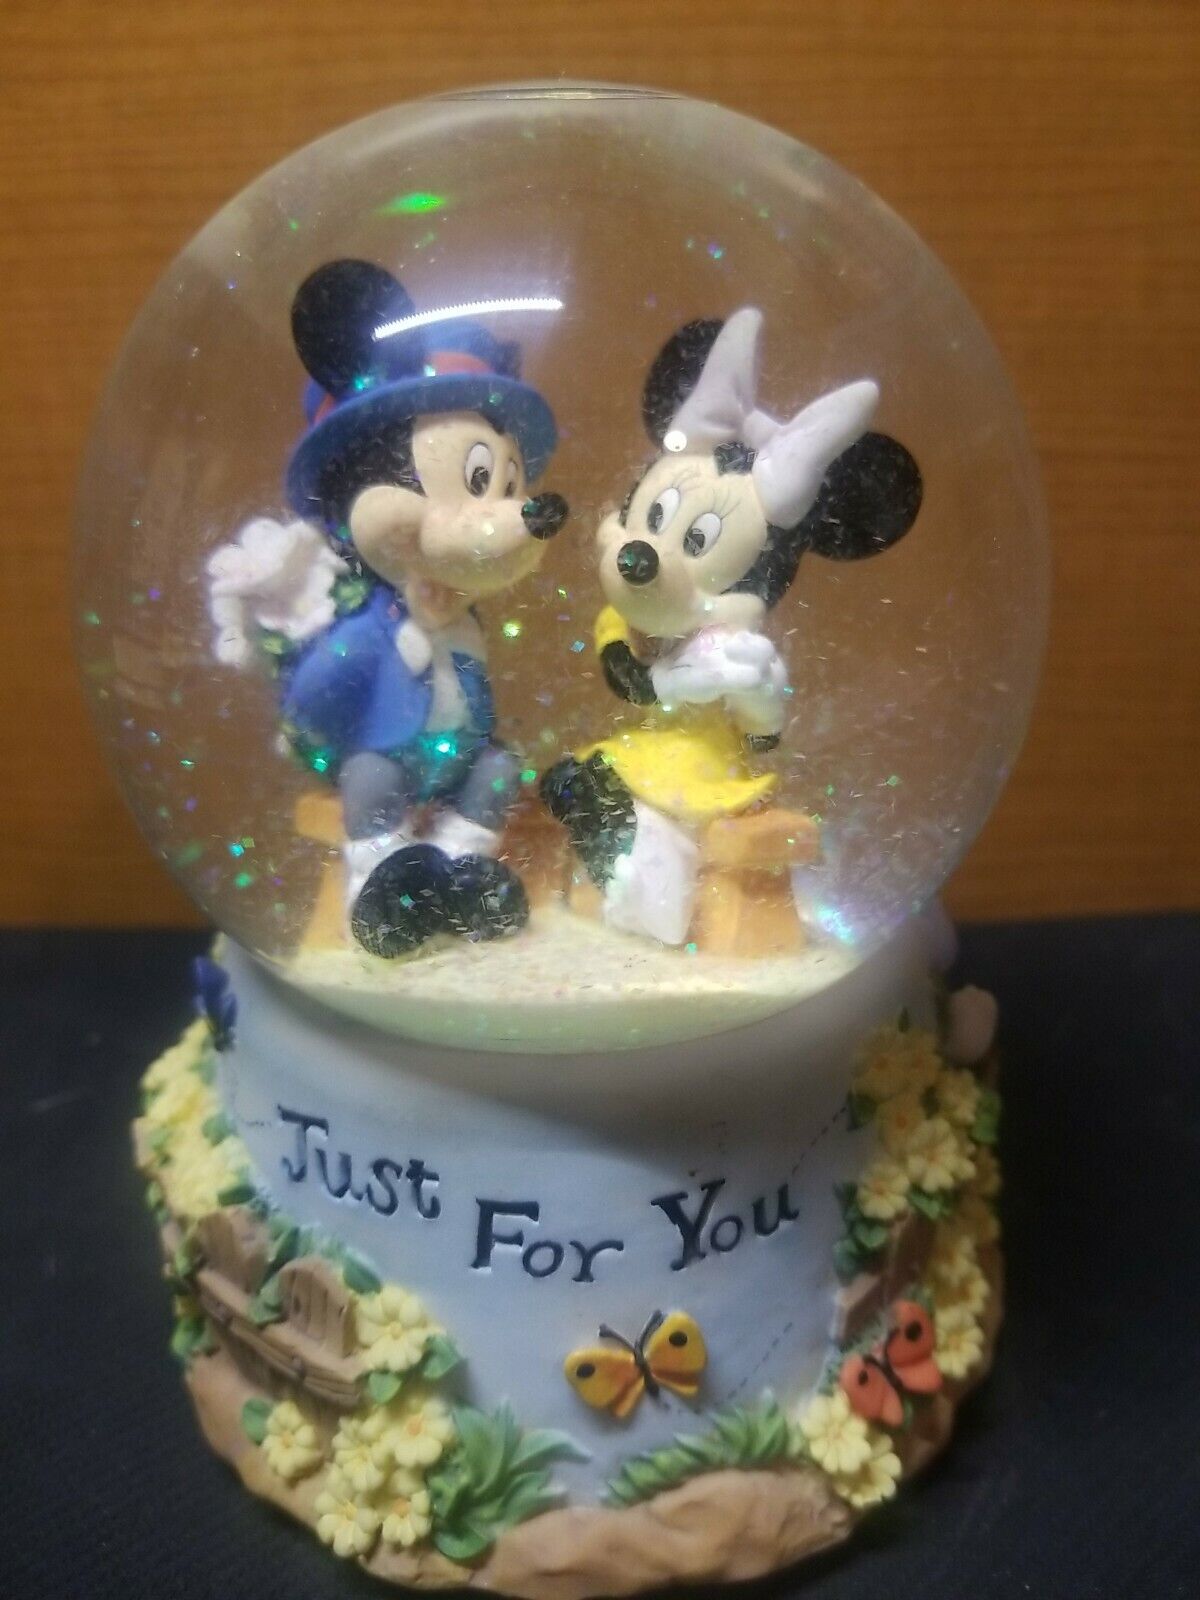 Disney Mikey and Minnie Enesco Musical Snow Globe “just for you”